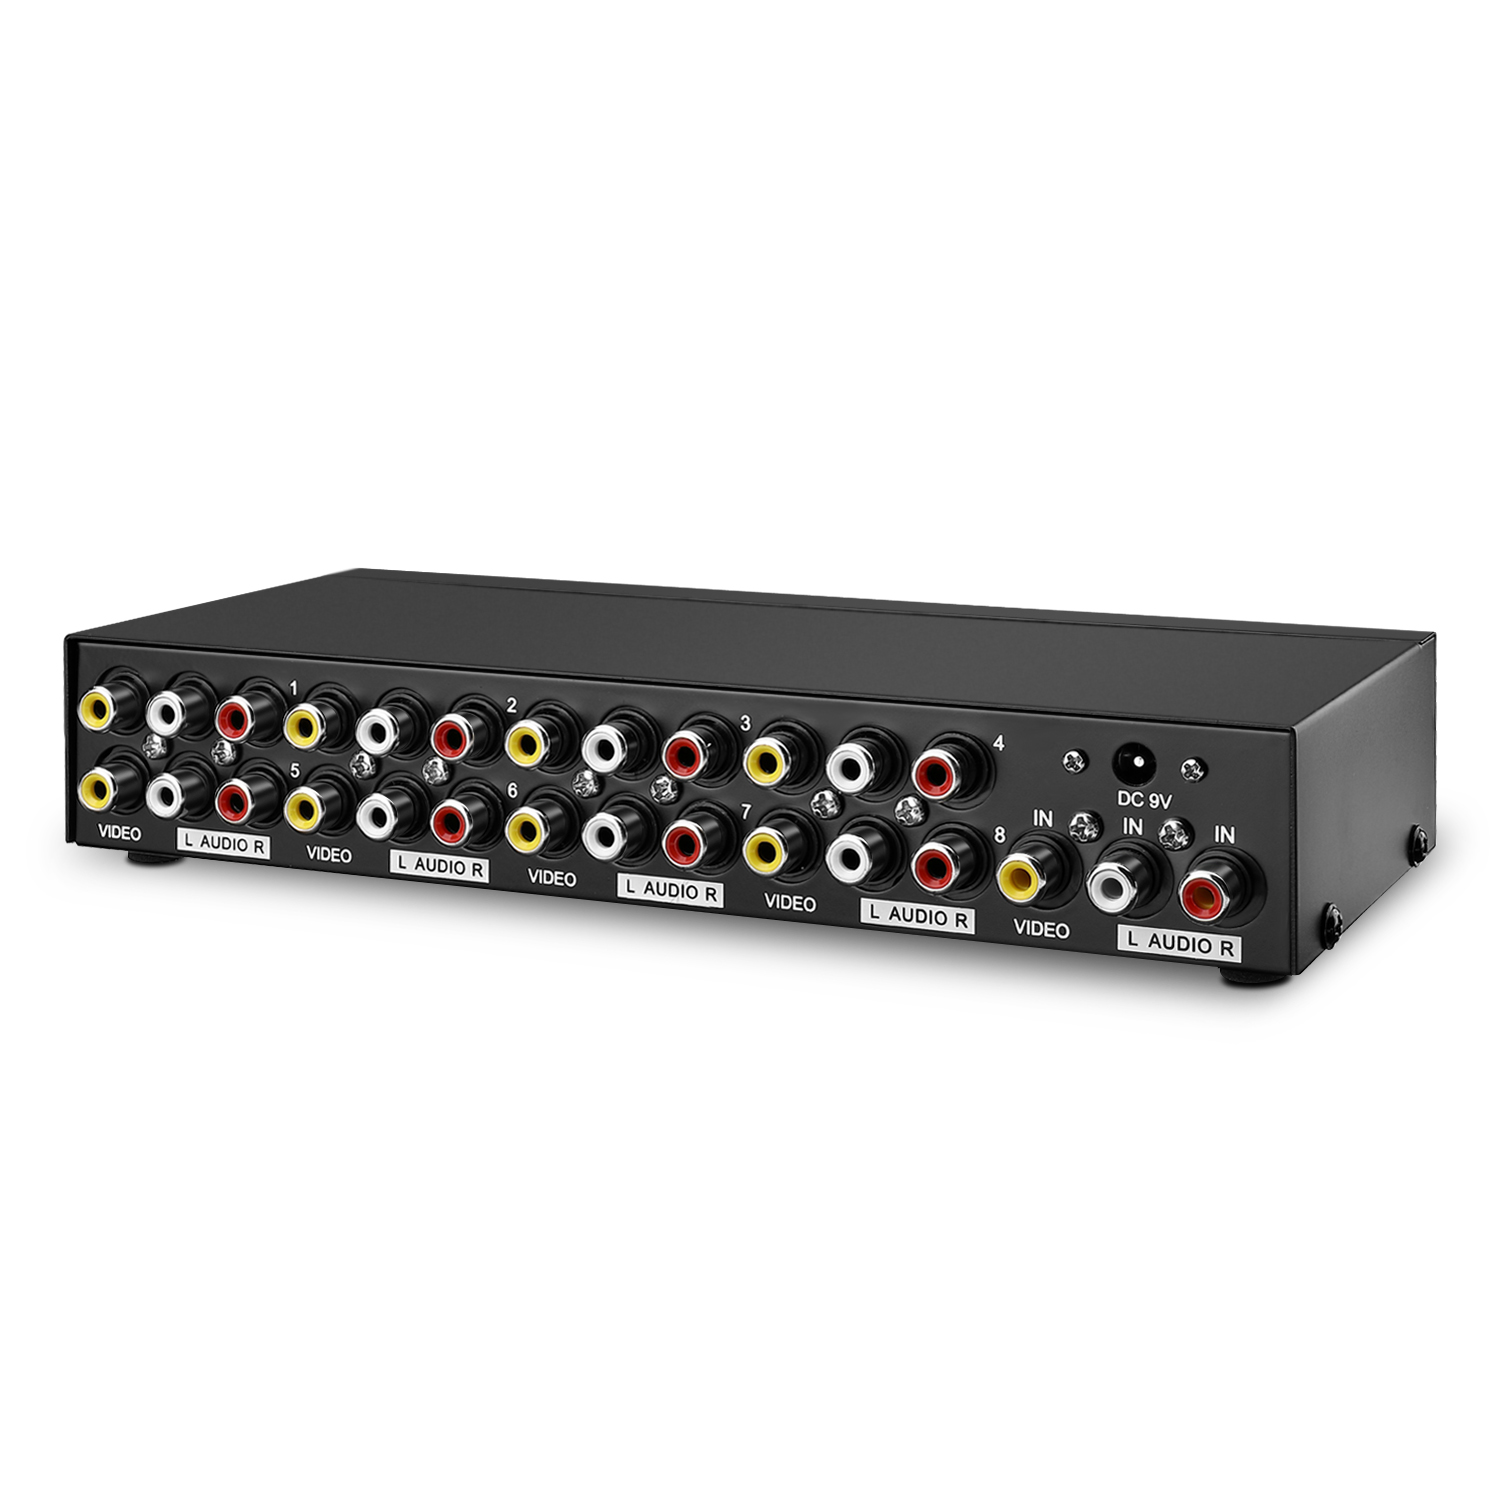 Distributes a single A/V signal to eight Components